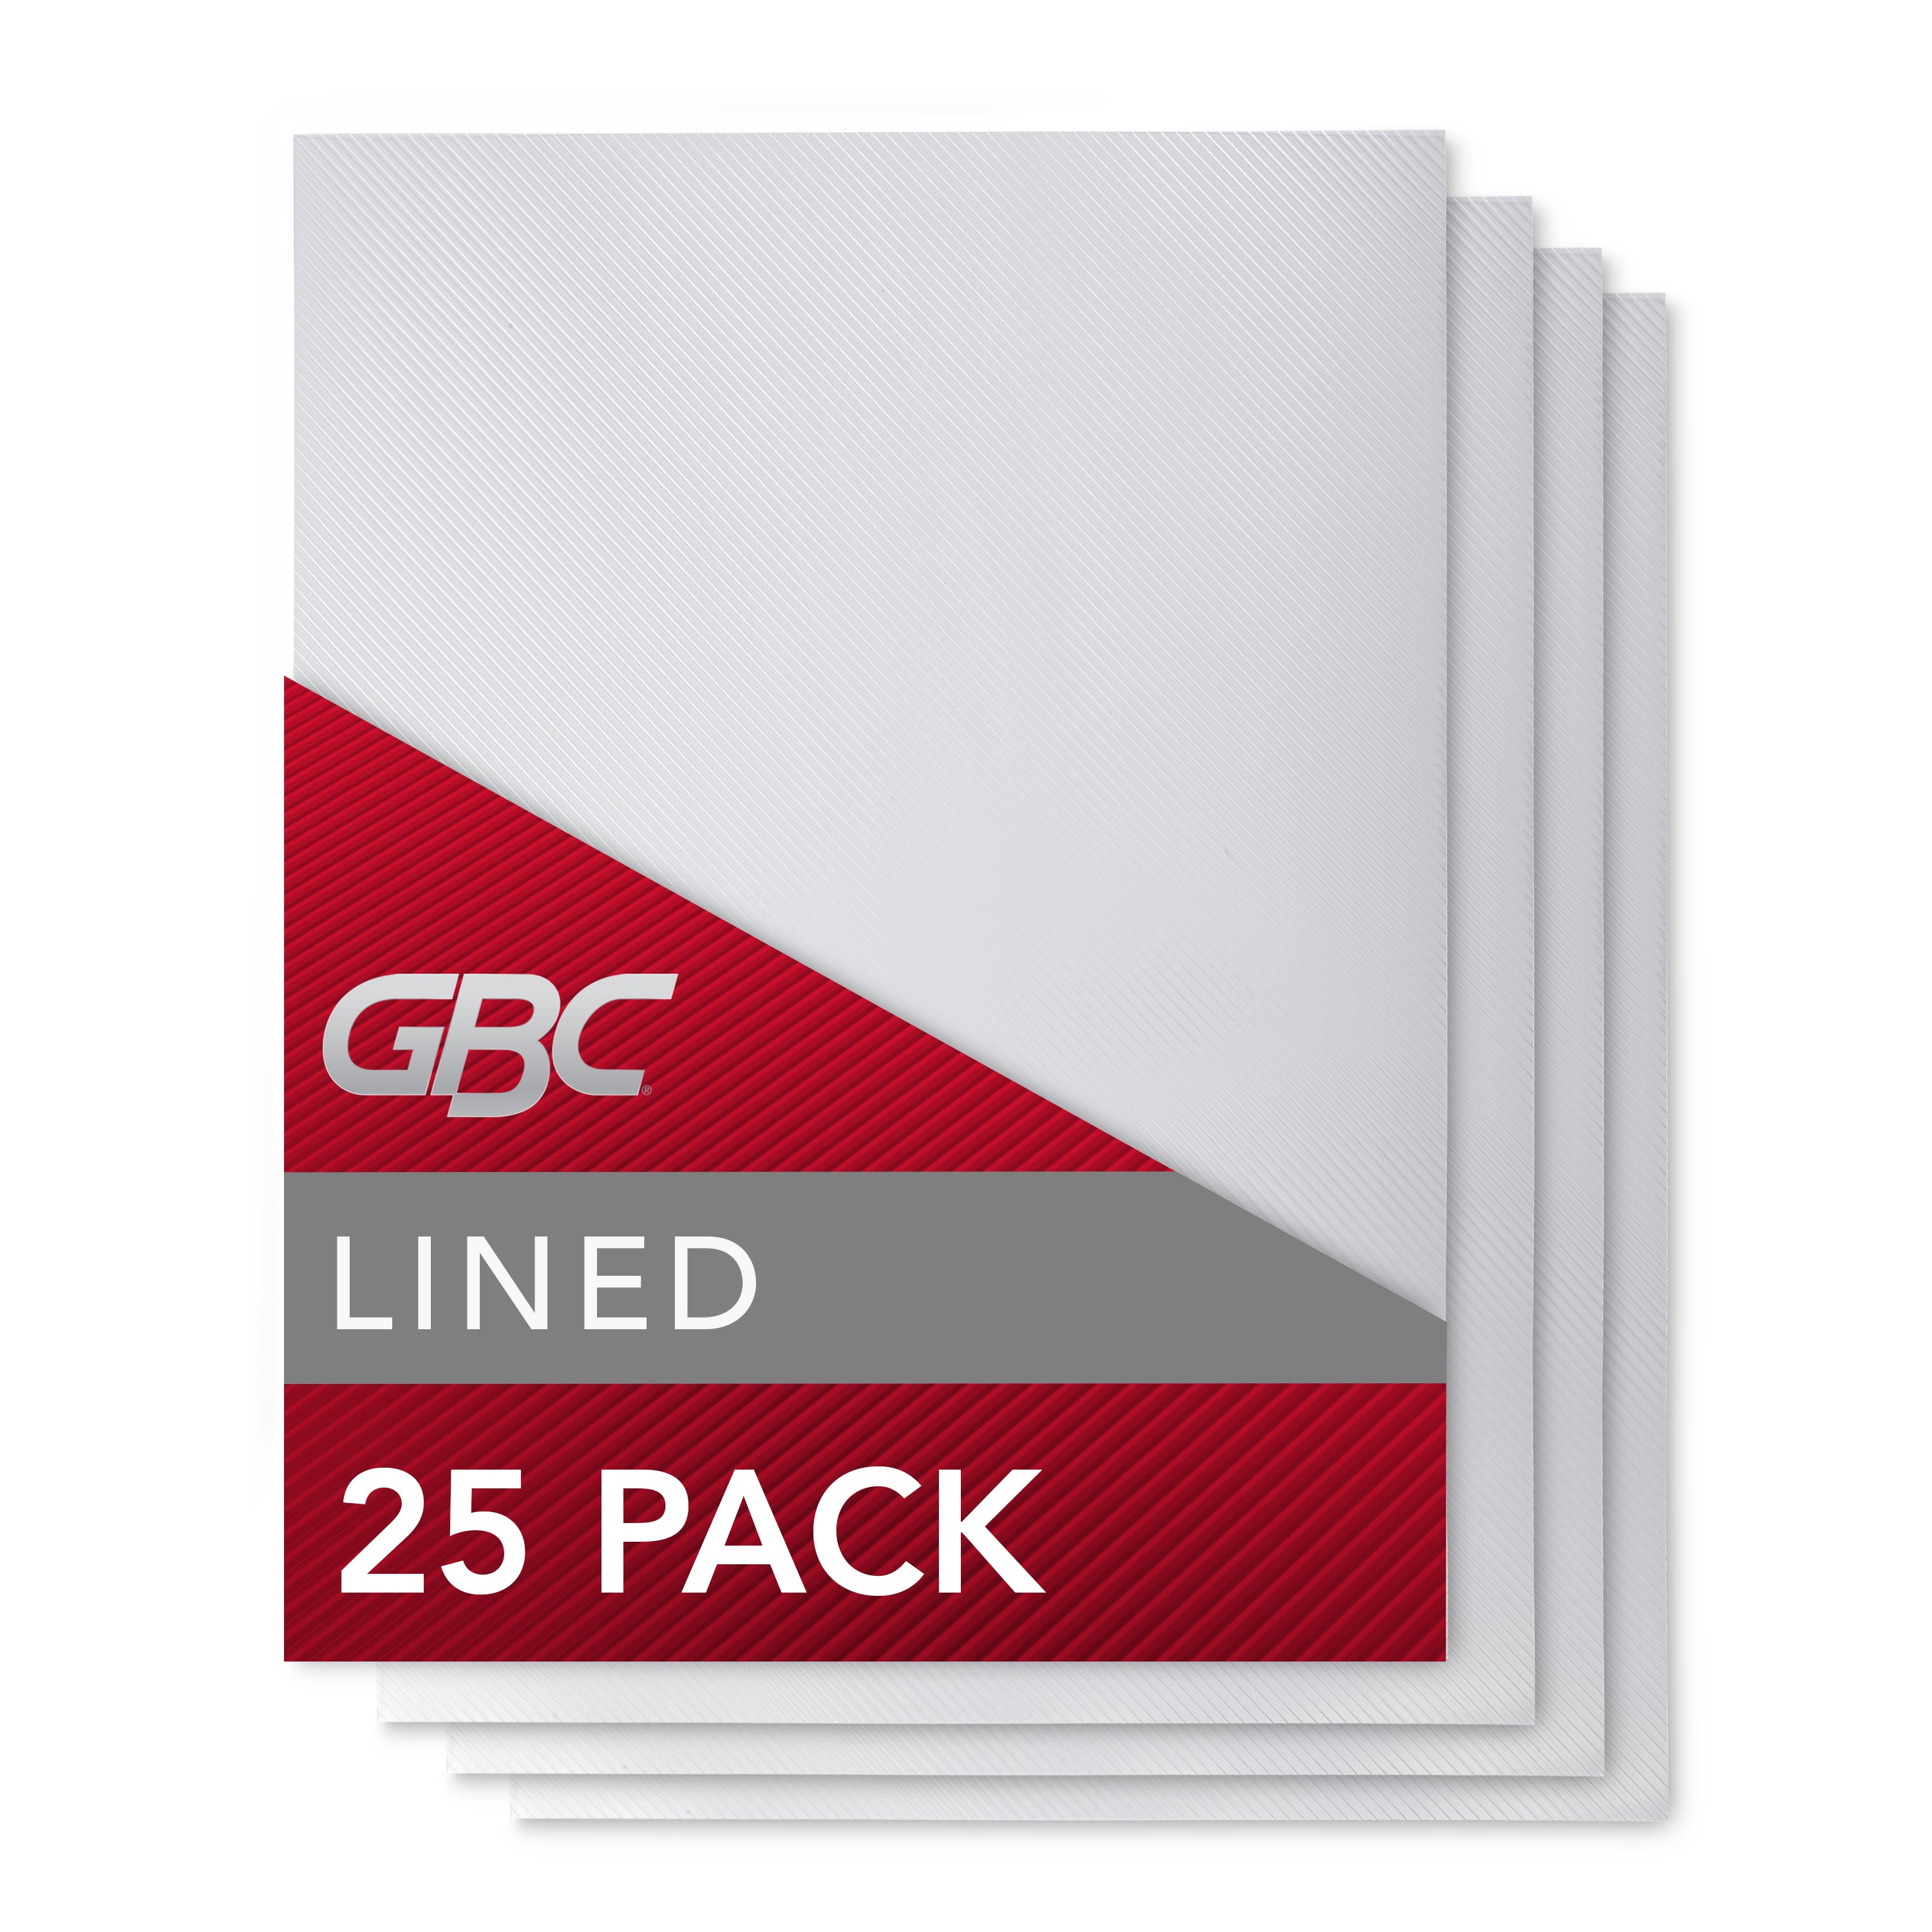 GBC Binding Presentation Covers, Unpunched, Lined Pattern, 8 3/4" x 11 1/4" (25 Pack)